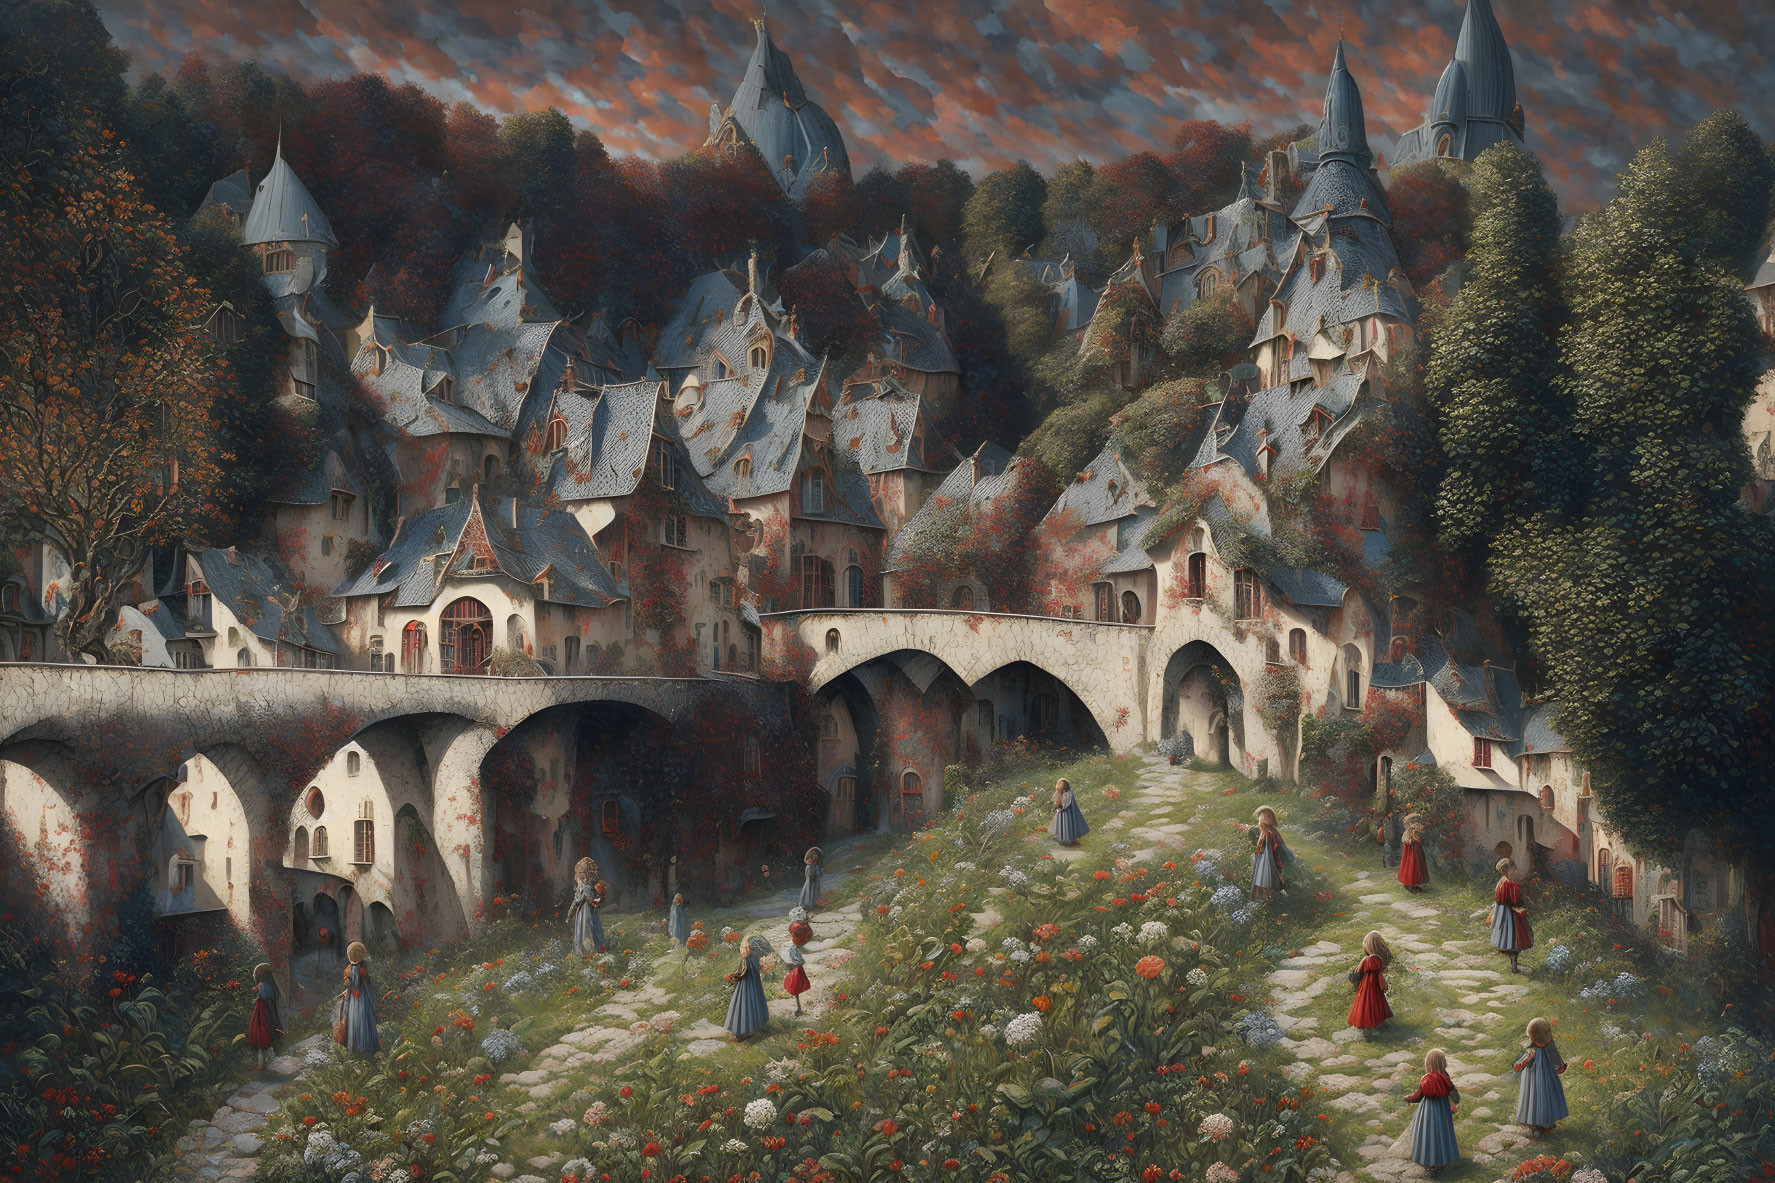 Medieval village with stone houses, turrets, bridge, dense foliage, people in period attire,